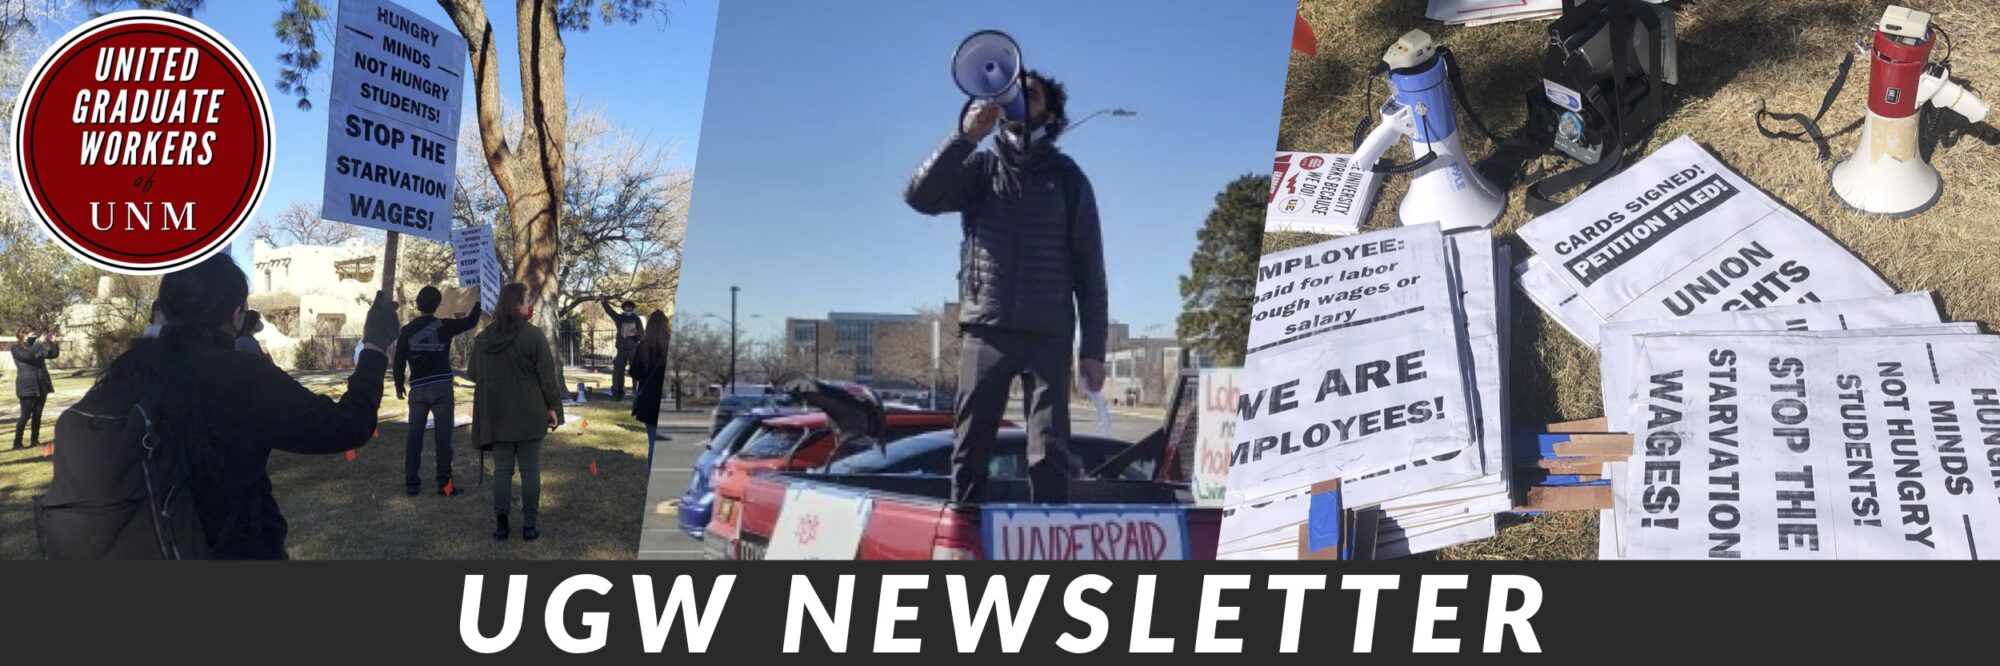 "UGW Newsletter" in bold white font along with images of union members protesting and the UGW logo.